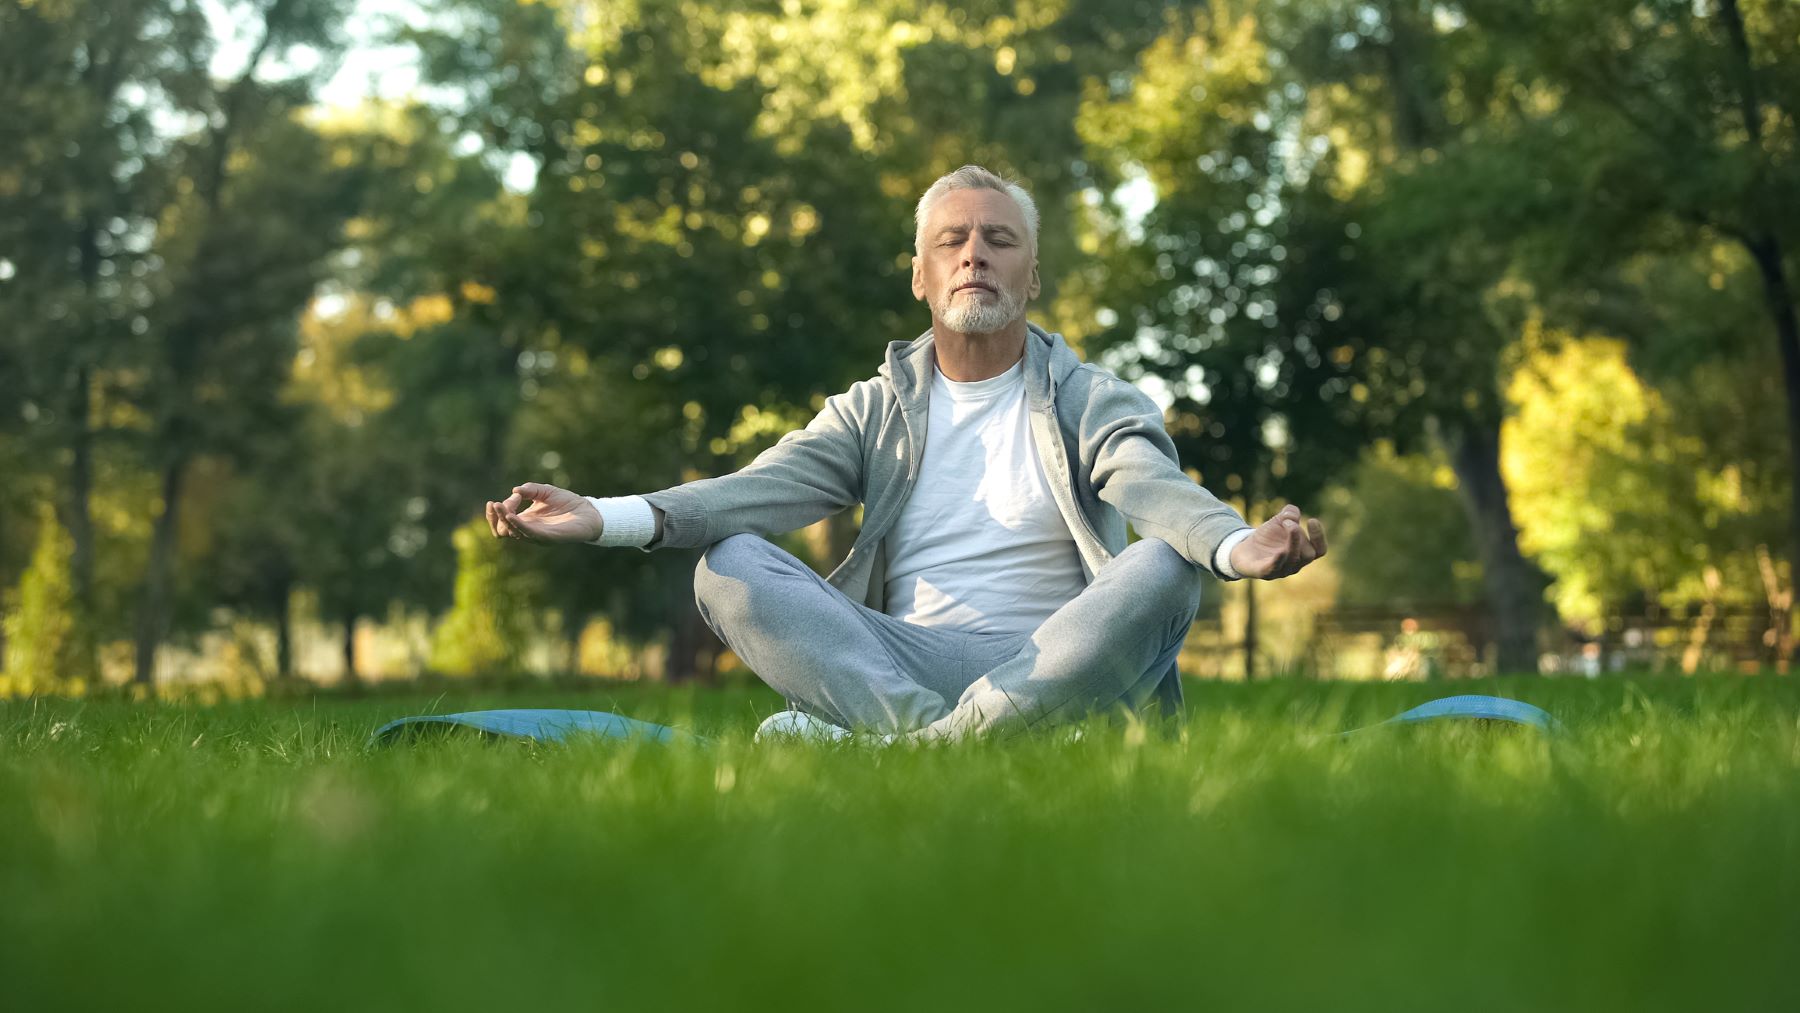 Middle aged man meditating outdoors